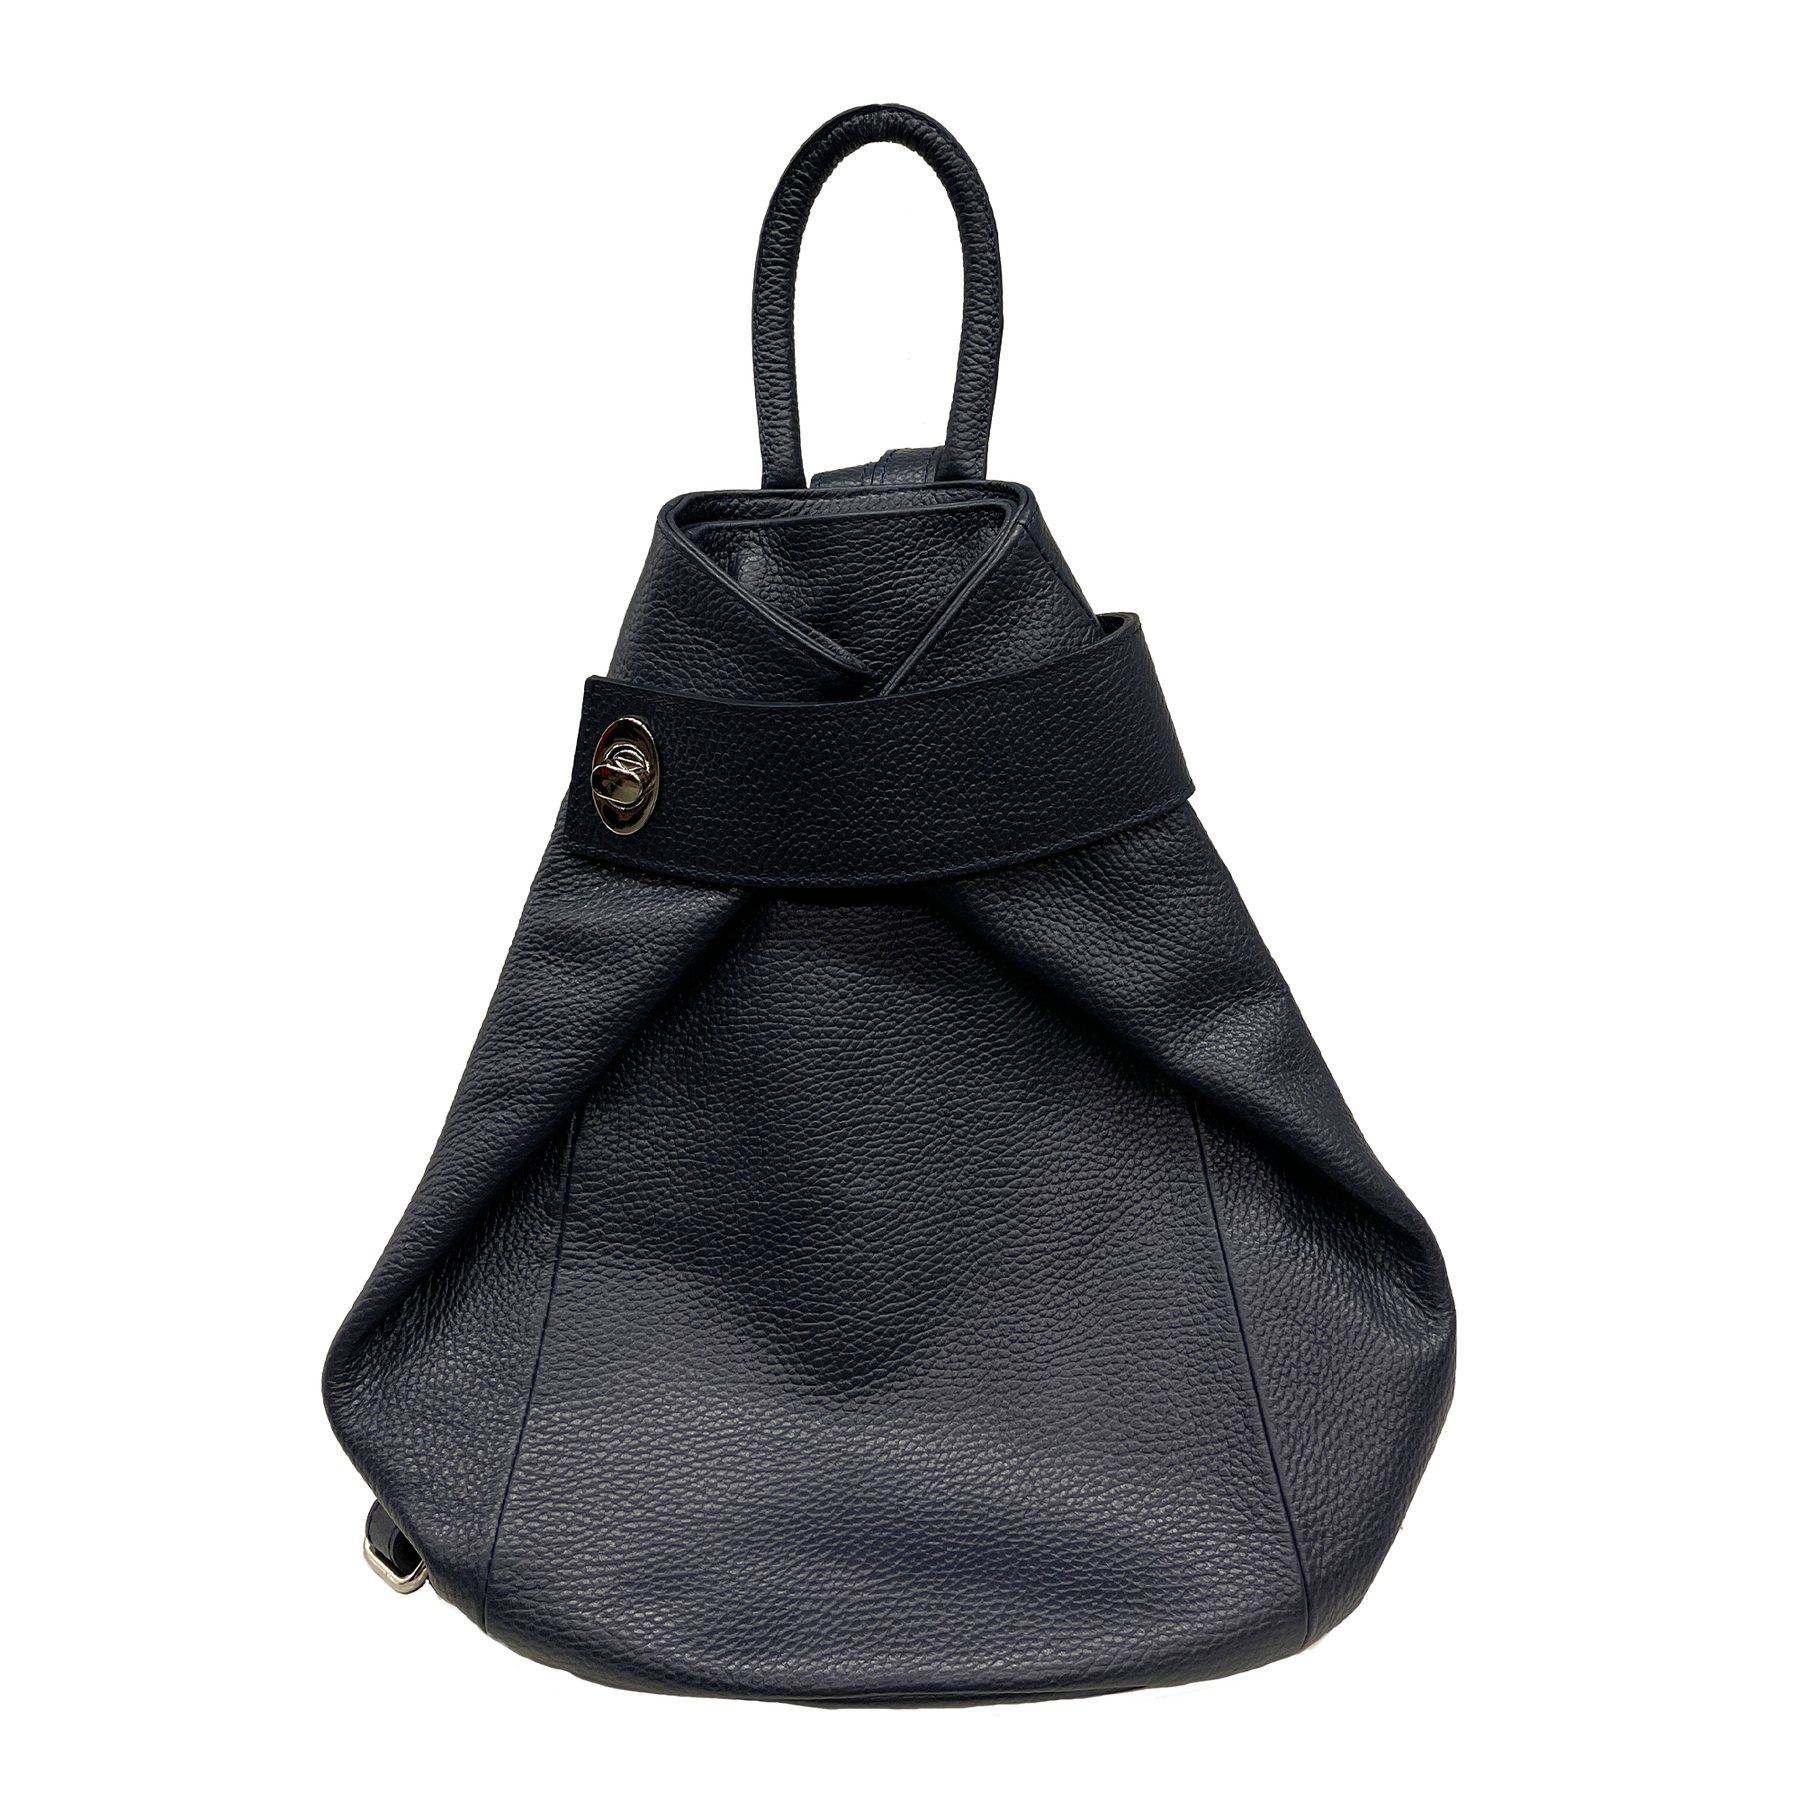 Convertible backpack in luxury leather - versatile and premium finish